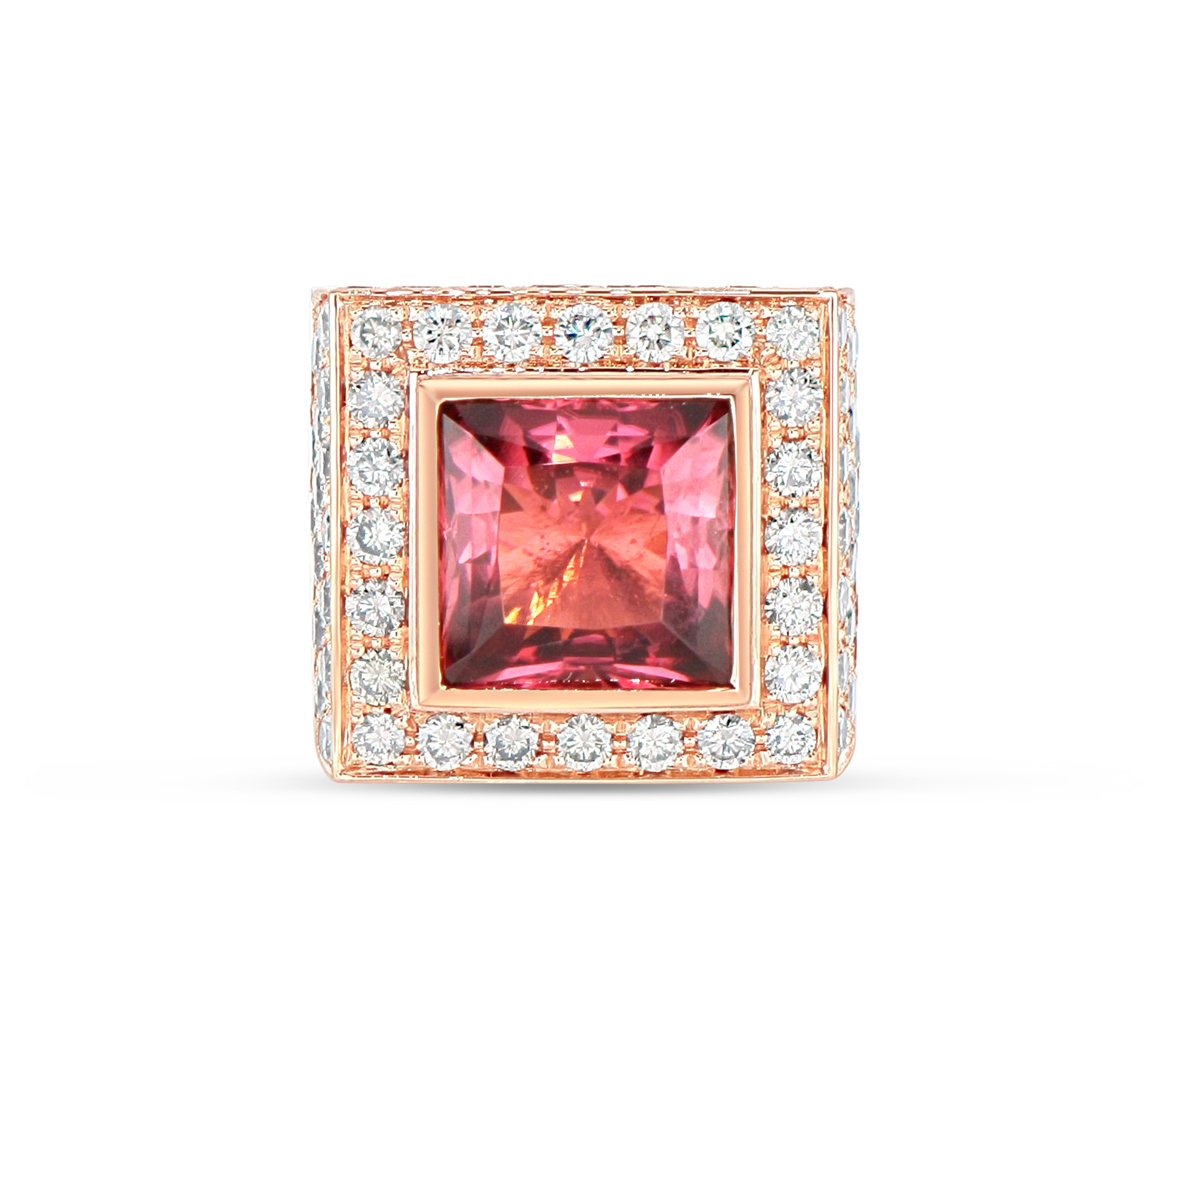 10.25ct Square Tourmaline Ring in 18kt rose gold